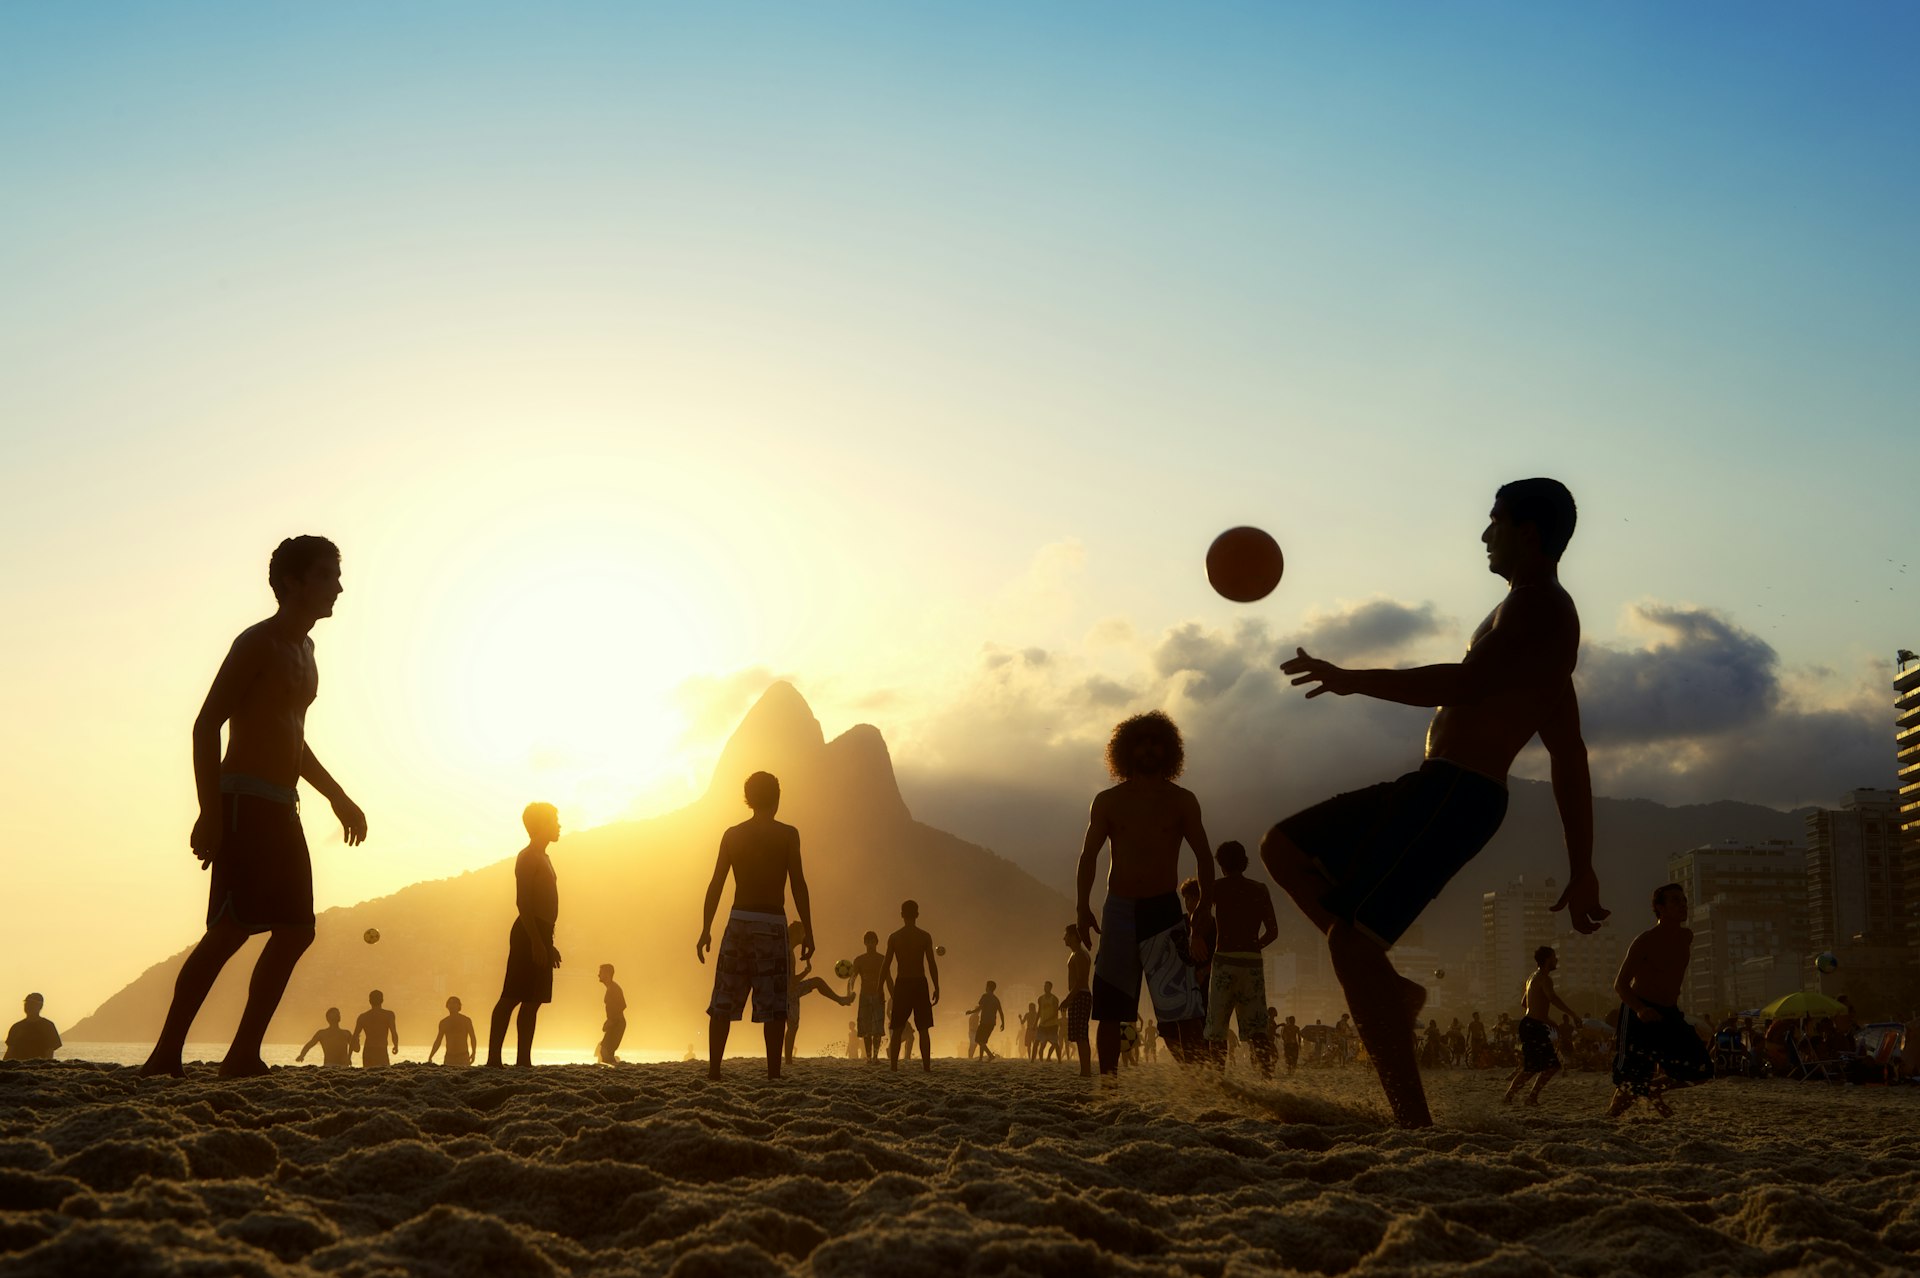 A silhouette of a group of people playing soccer on a beach at sunset, with the Dois Irmãos (Two Brothers) mountain in the background, characteristic of Rio de Janeiro's landscape.